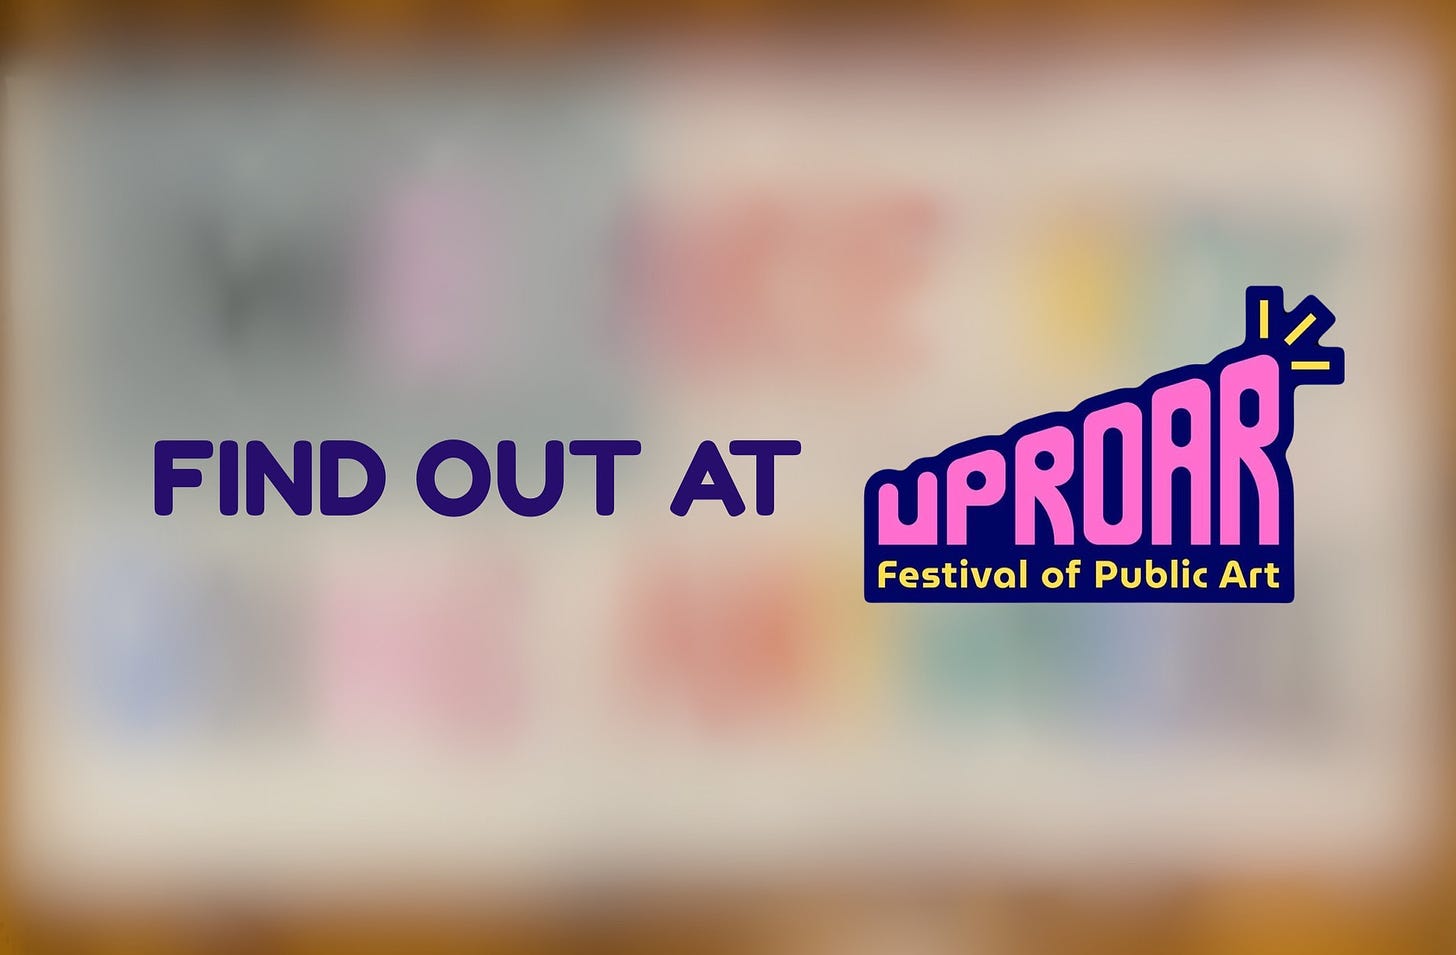 A blurred out image with "Find out at Uproar" written on dark purple text on top. The logo for Uproar Festival of Public Art is on the image.